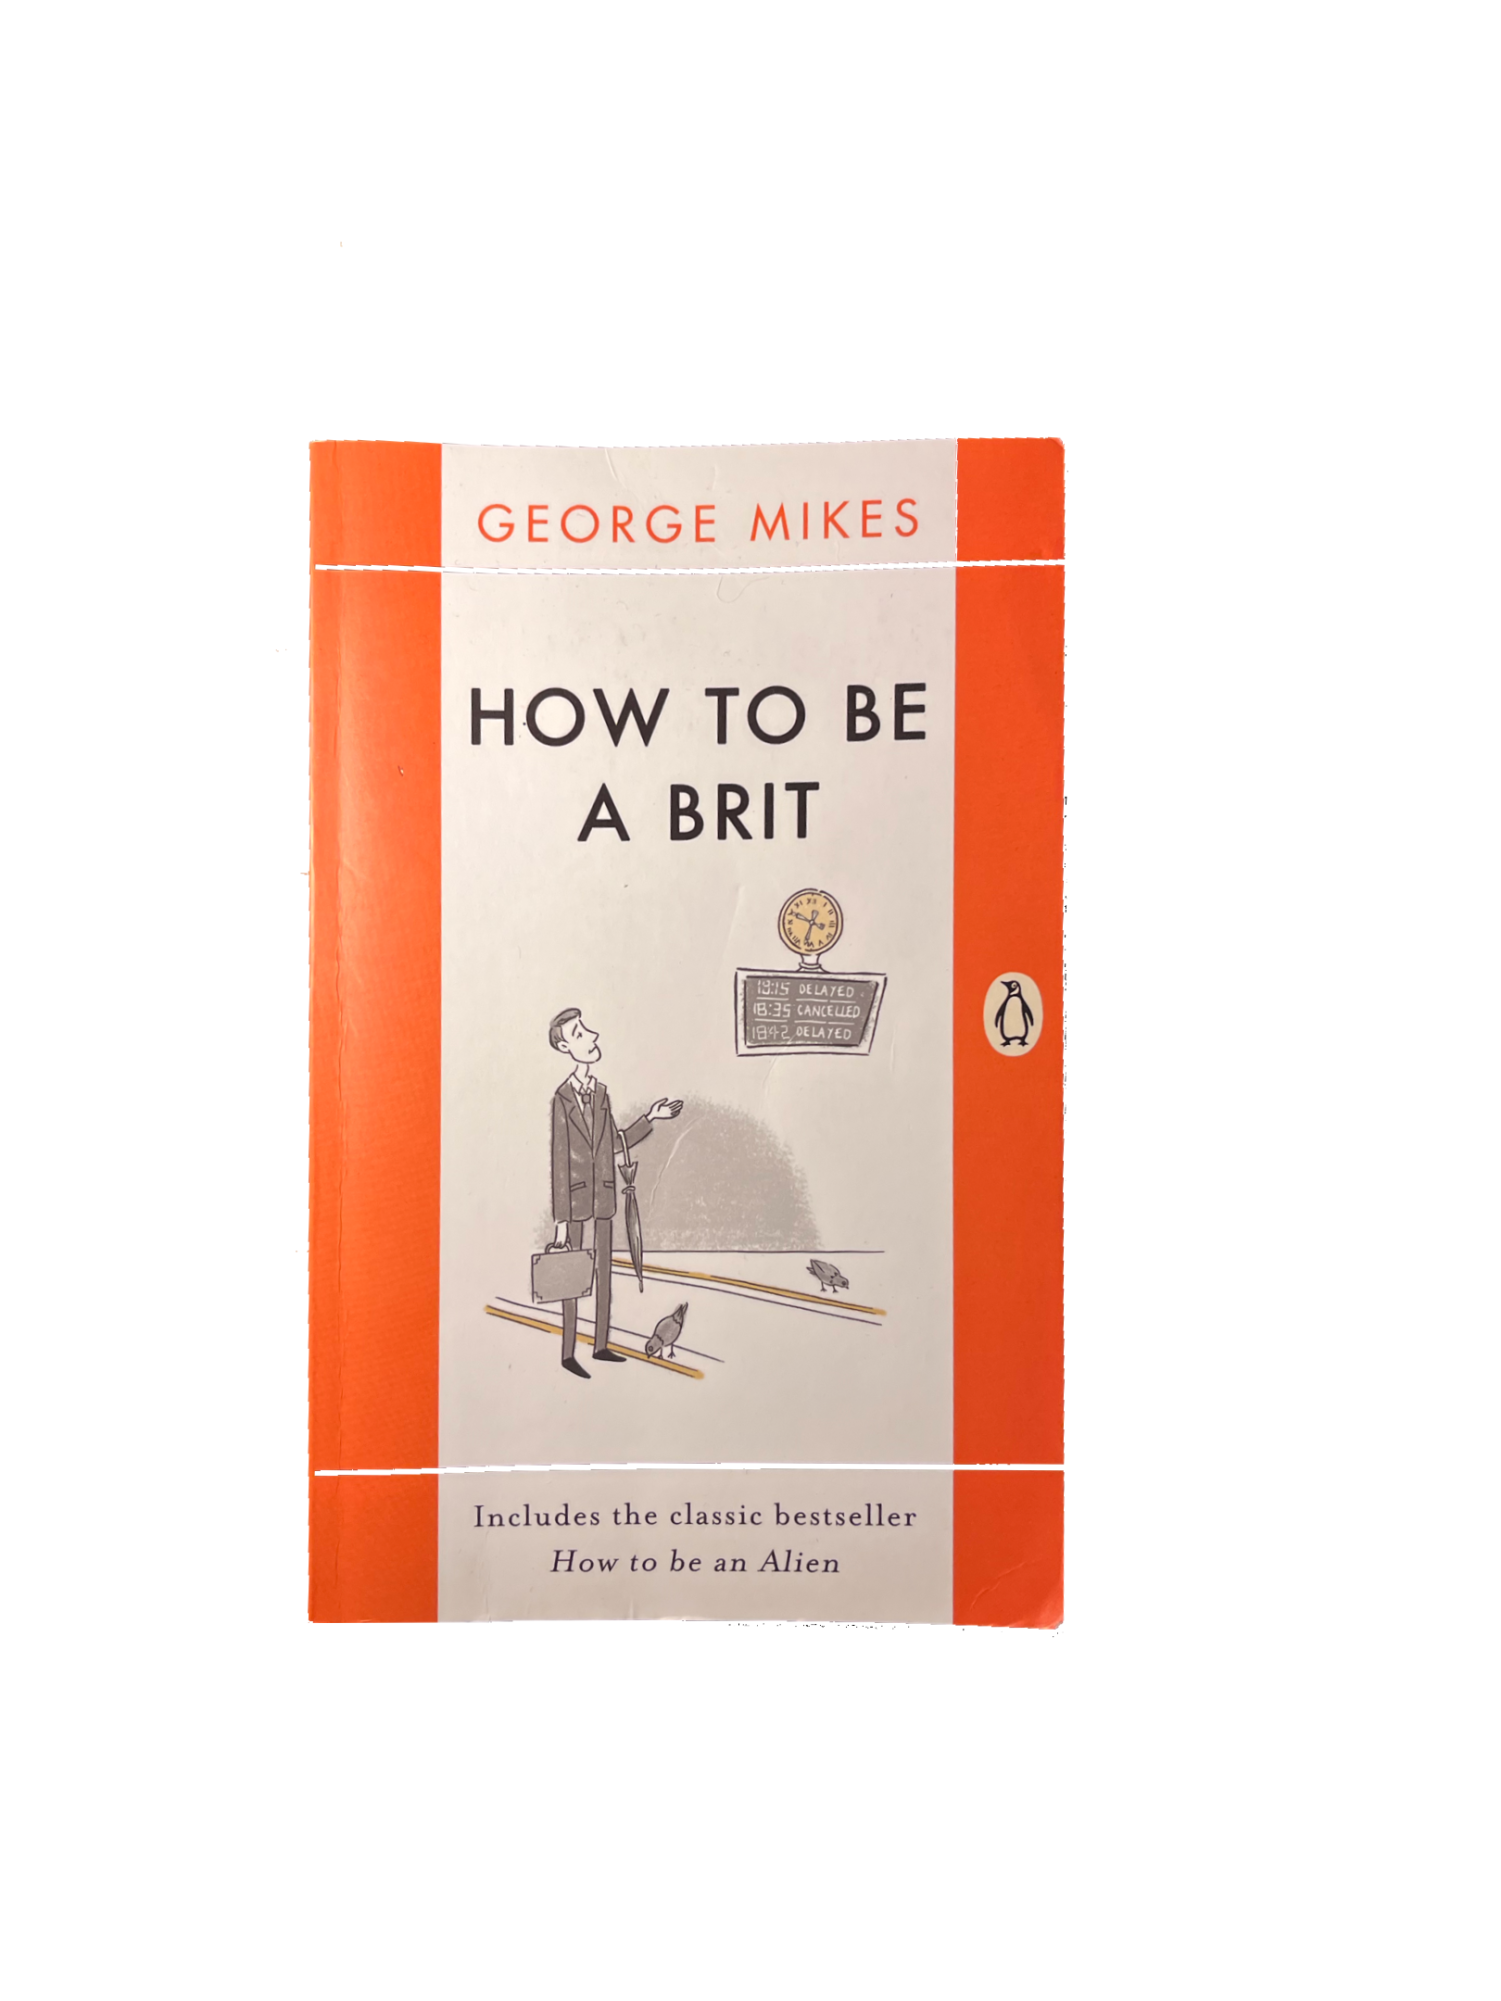 If you are looking for a laugh, George Mikes How To Be a Brit ultizes dry humor to entertain the reader. Furthemore this book uses experiences in the real world to inspire comedy. 